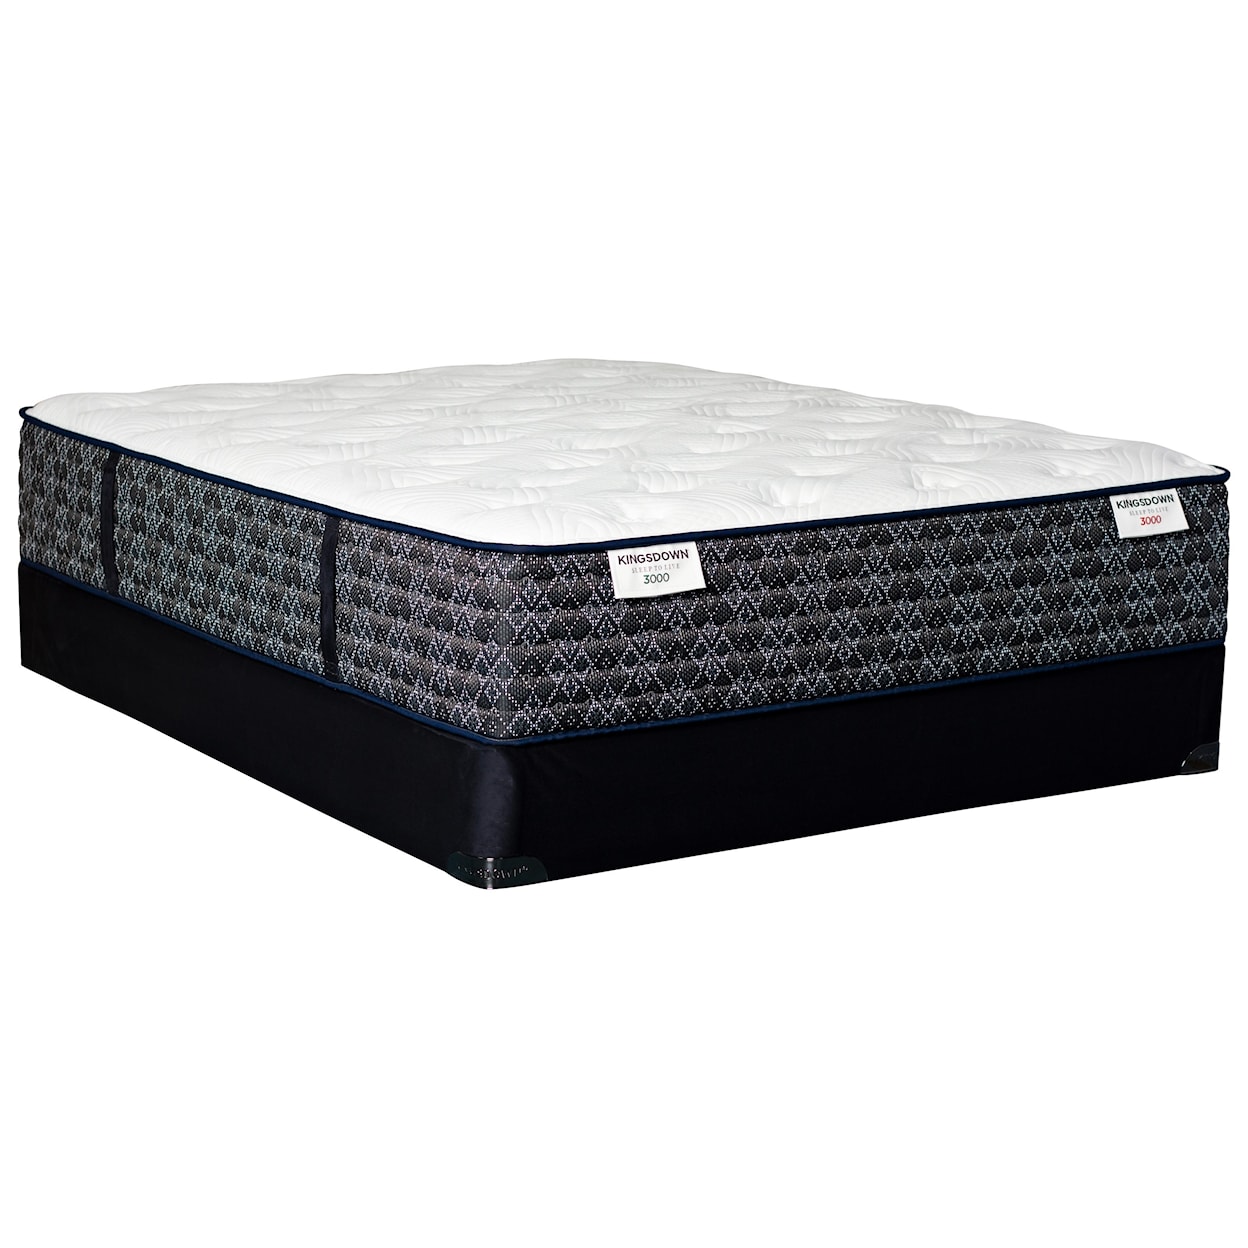 Kingsdown Sleep to Live 3000 Green Red Full Pocketed Coil Mattress Set